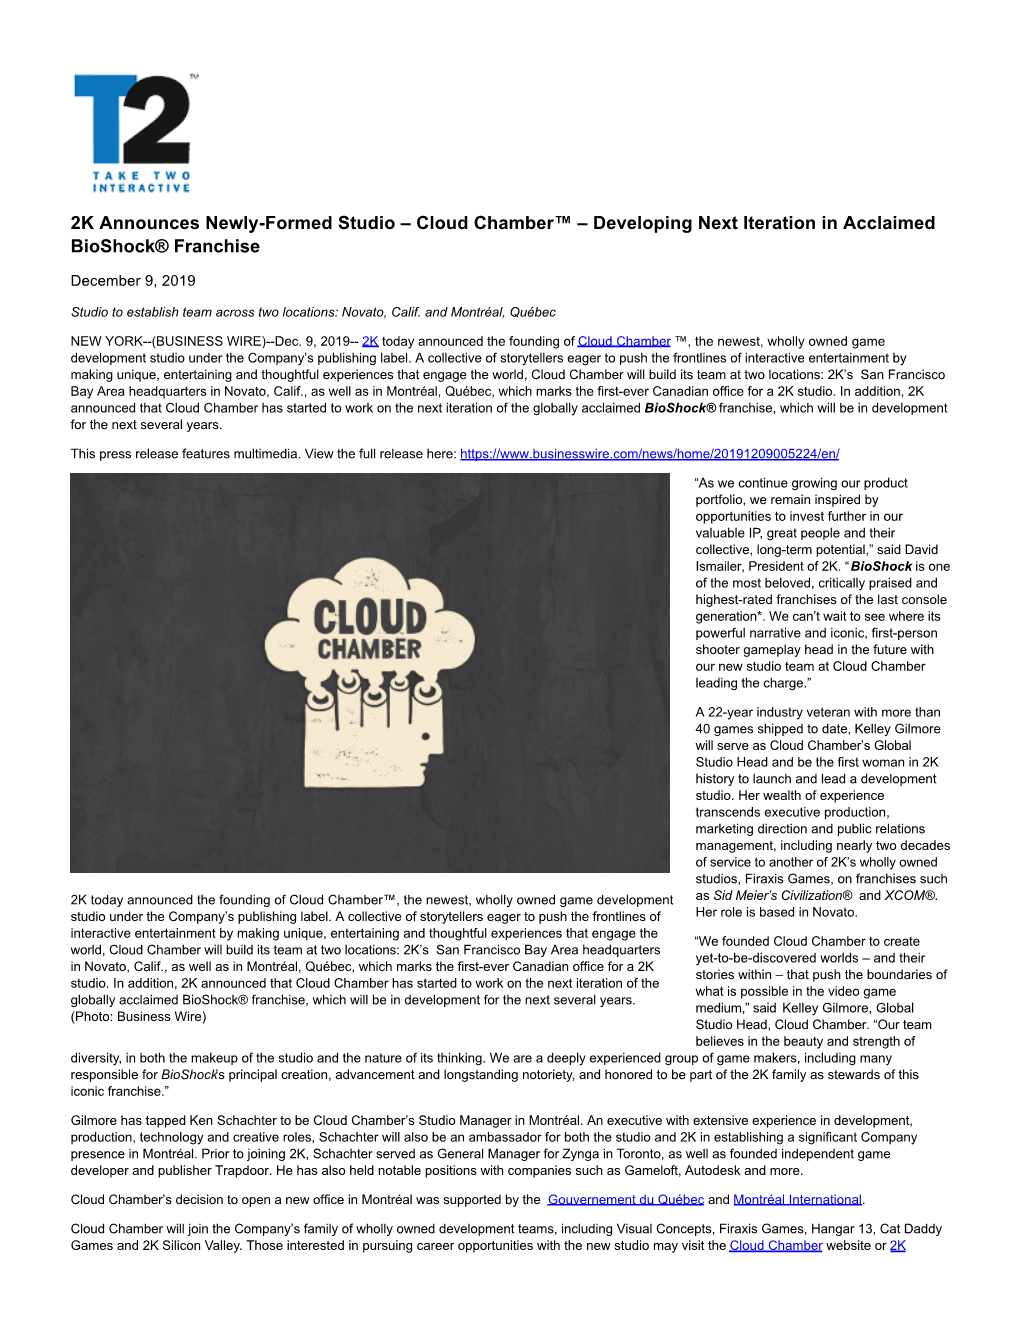 2K Announces Newly-Formed Studio – Cloud Chamber™ – Developing Next Iteration in Acclaimed Bioshock® Franchise